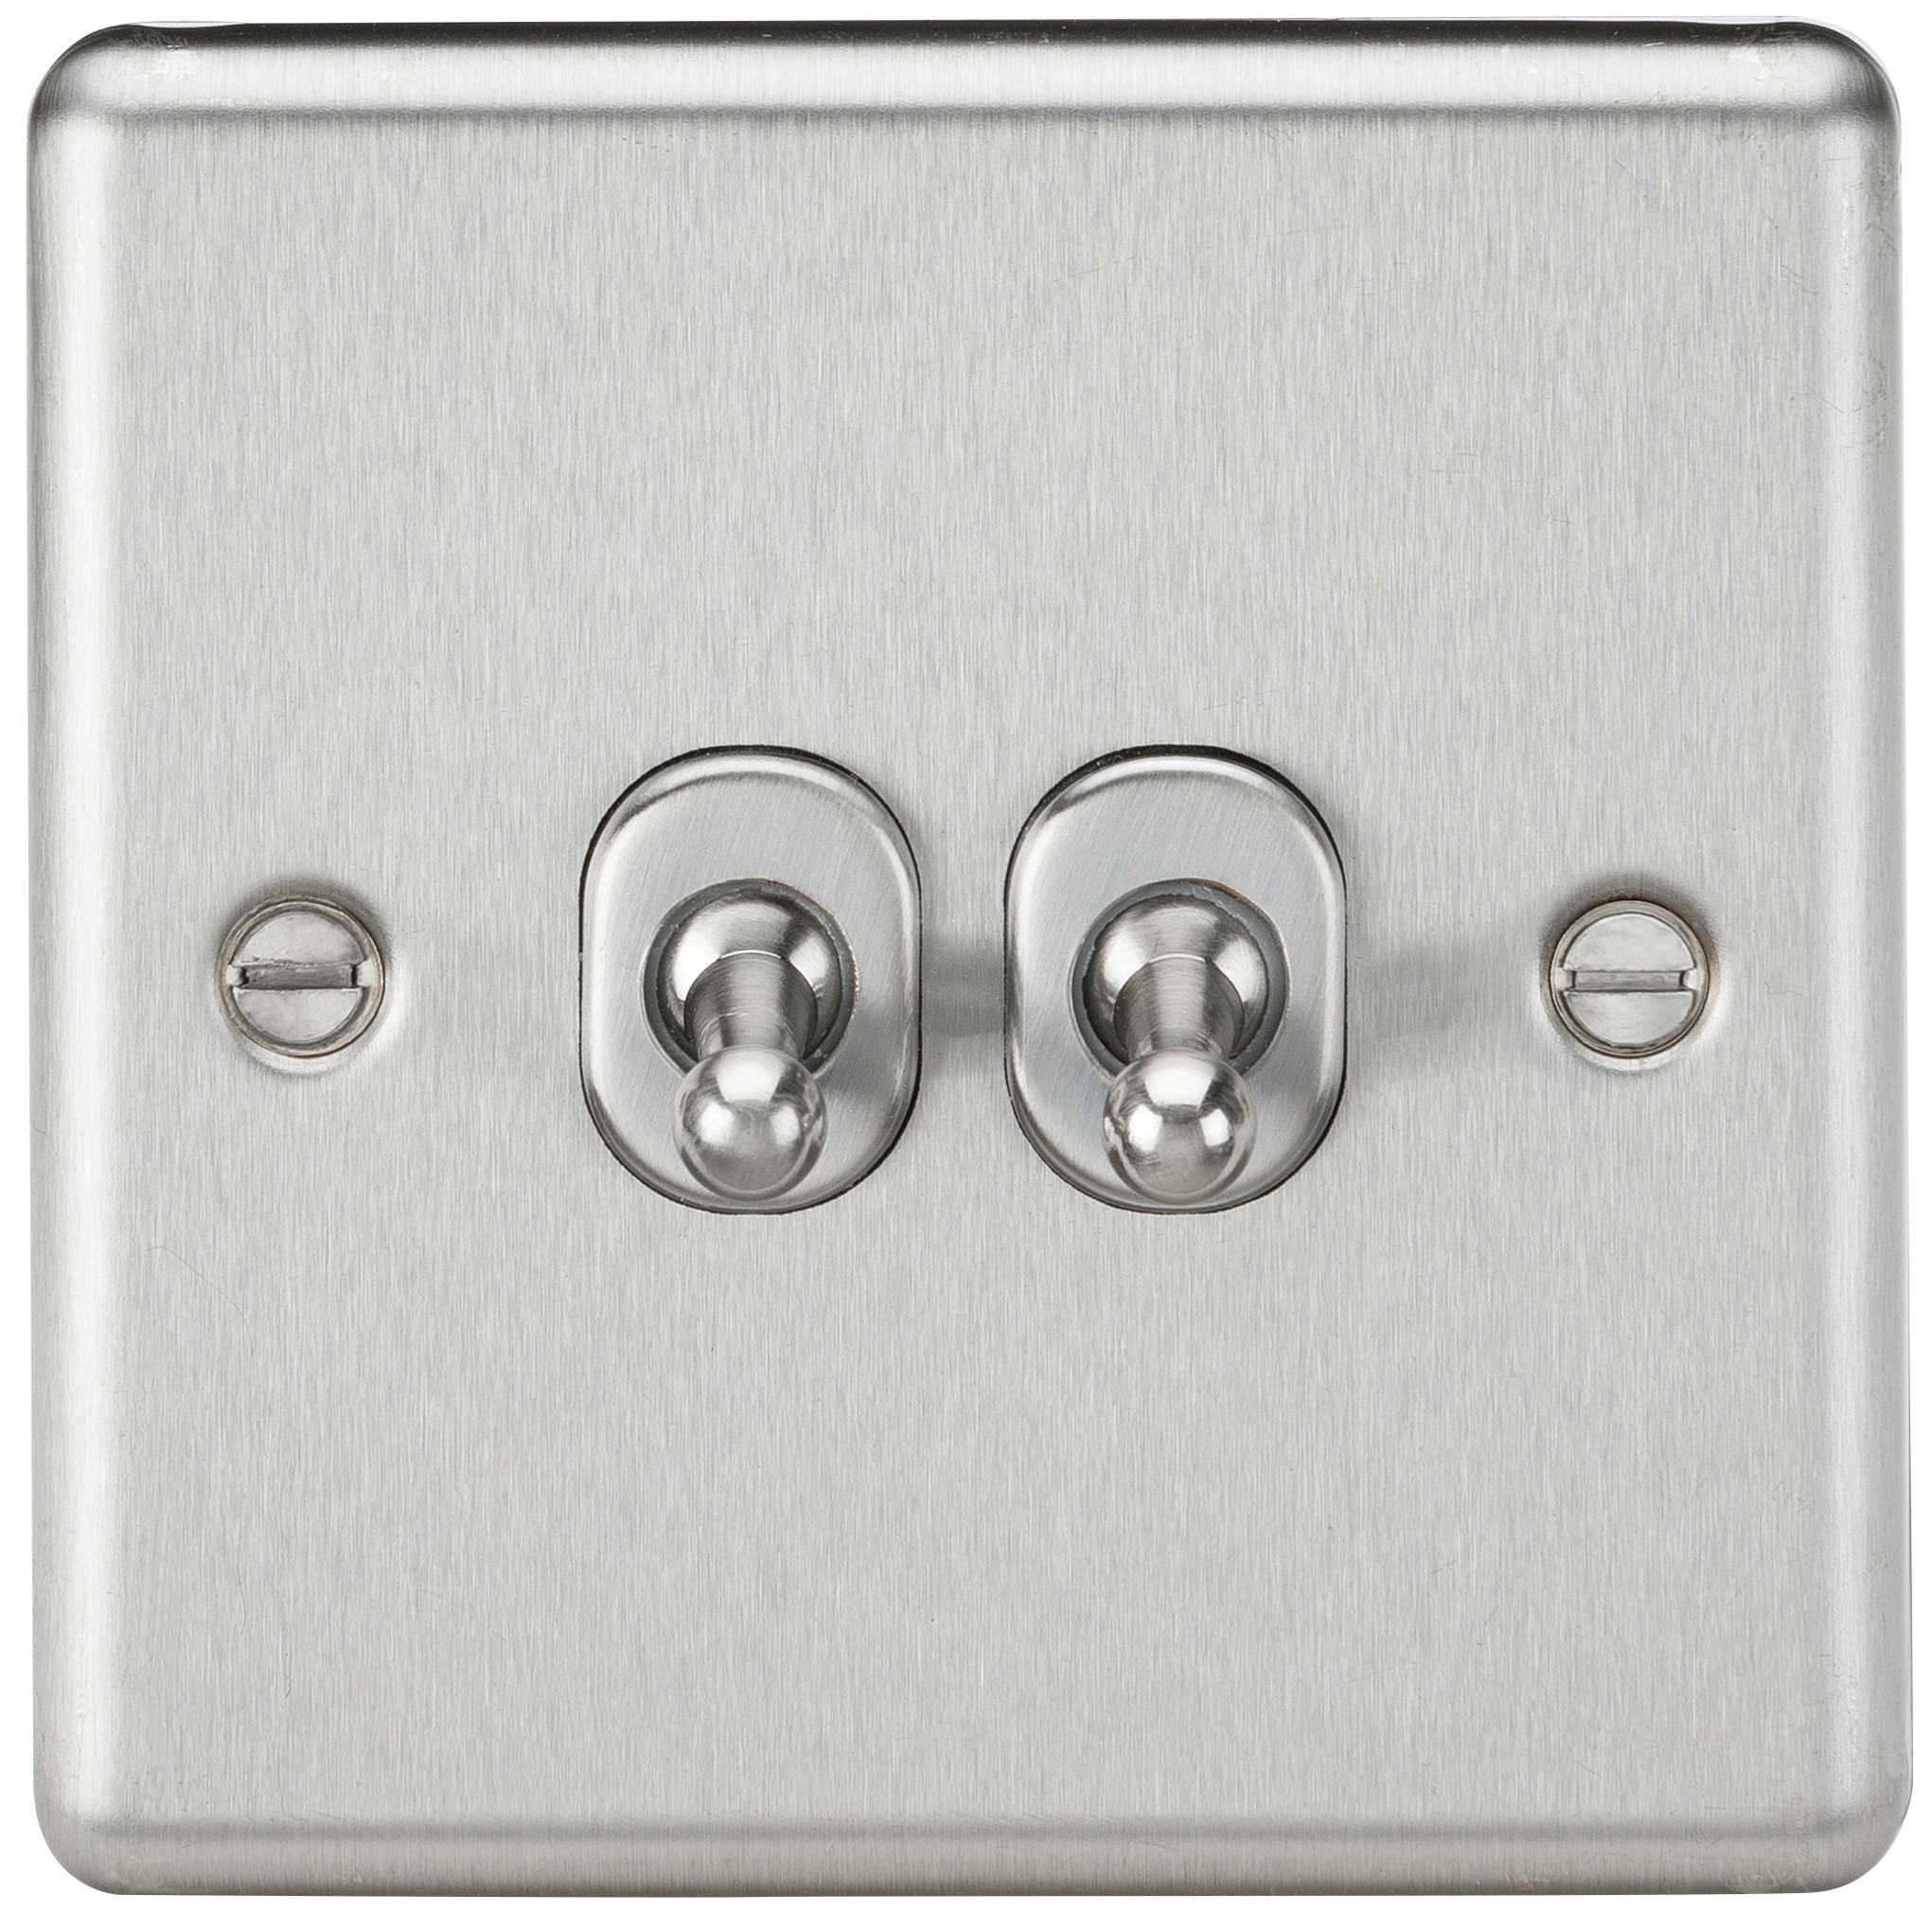 10A 2G 2 Way Toggle Switch - Rounded Brushed Chrome Finish - CLTOG2BC 